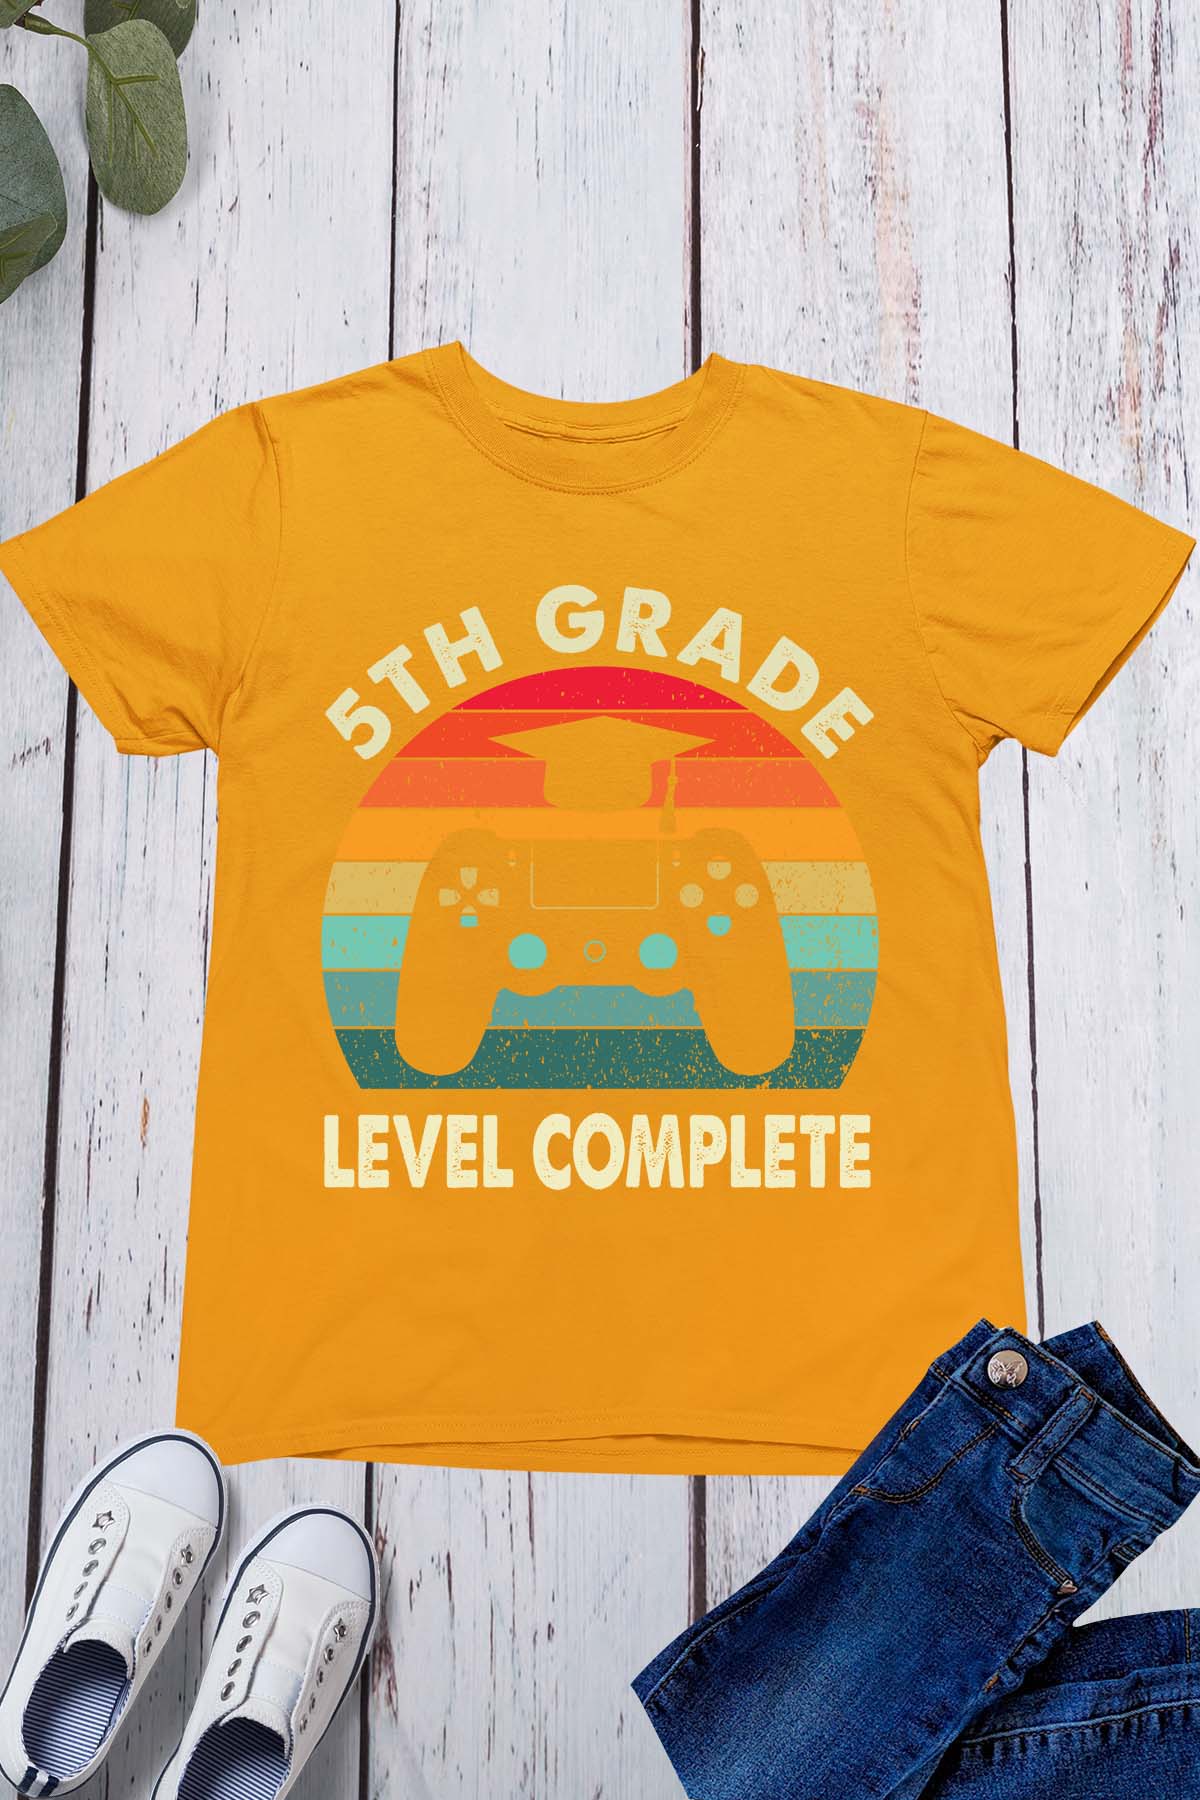 5th Grade Level Complete Funny Kids Shirt